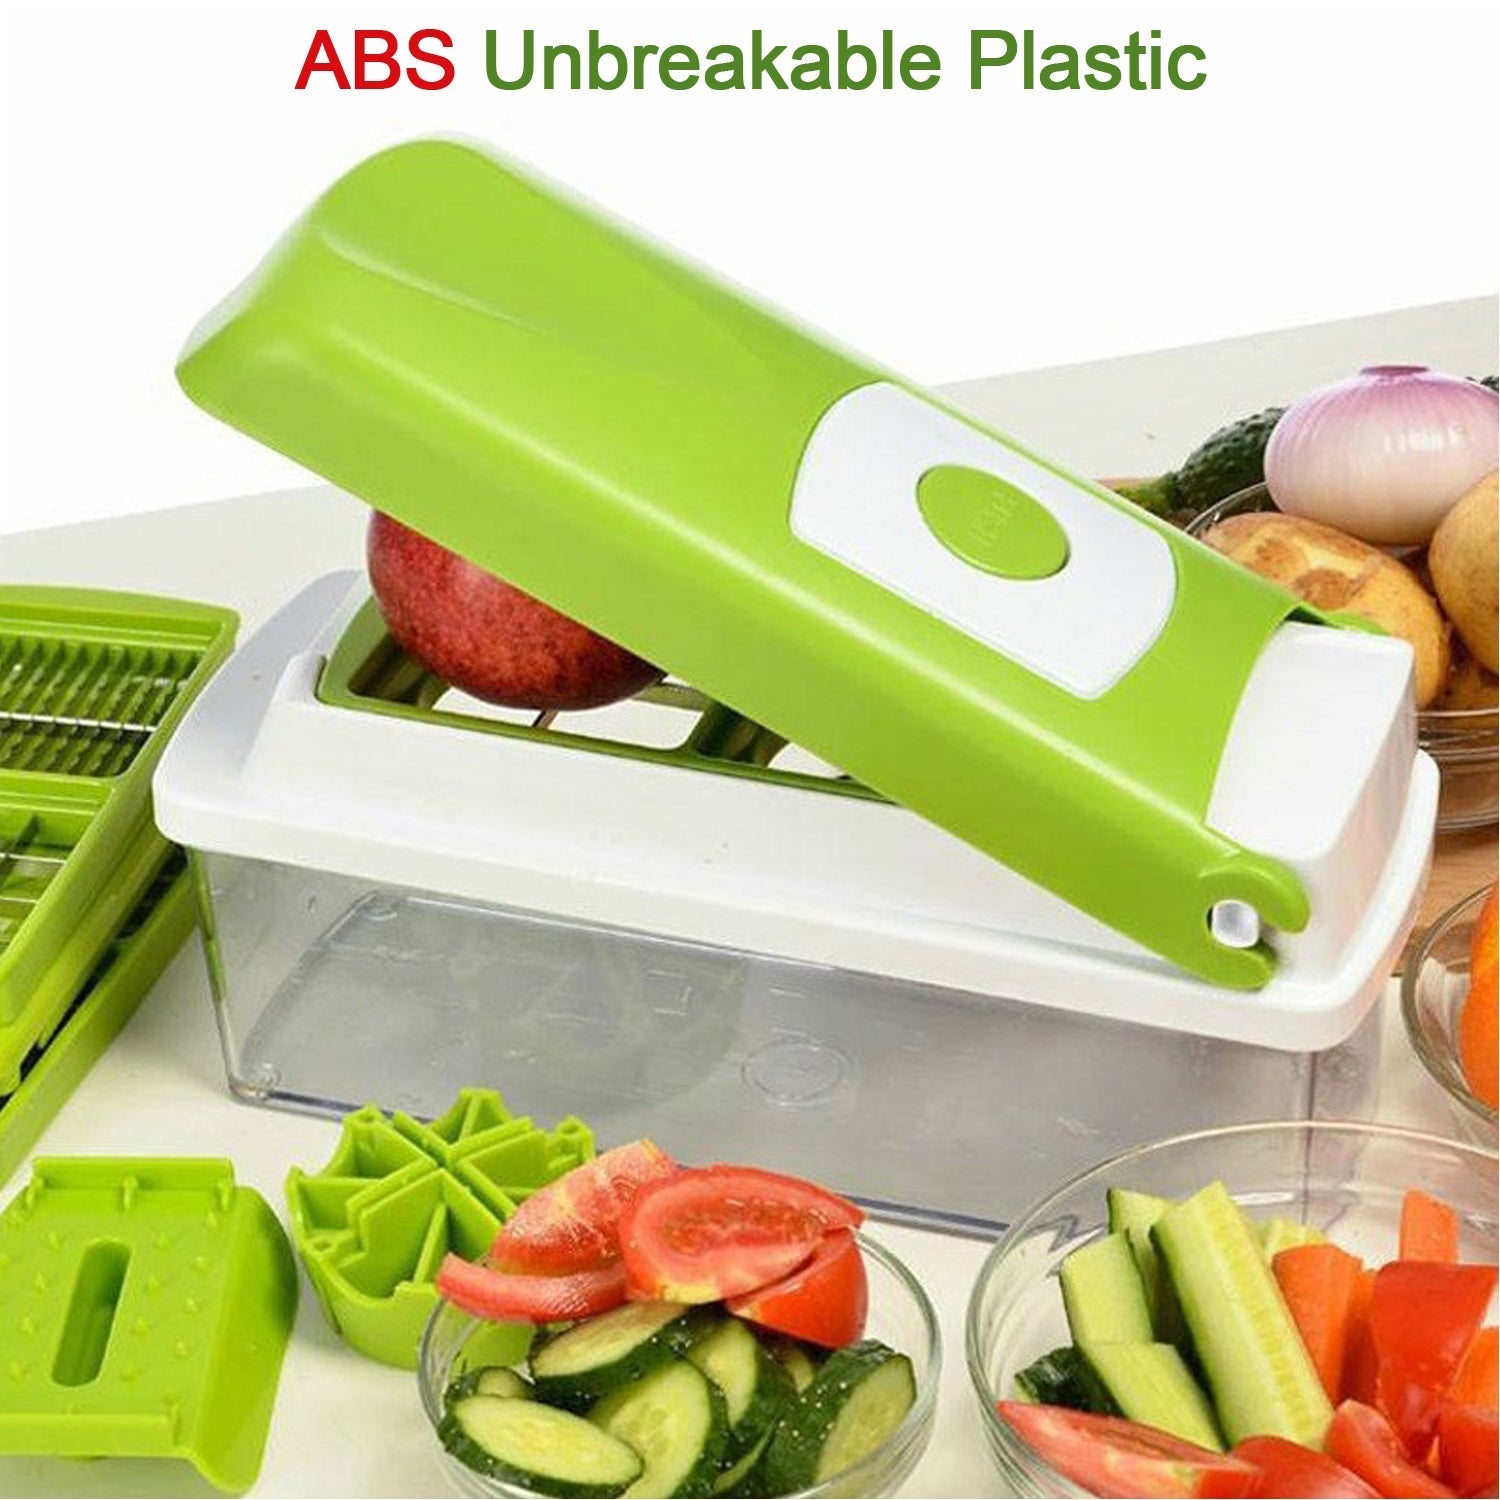 2489 Plastic 13-in-1 Manual Vegetable Grater,Chipser and Slicer Dukandaily